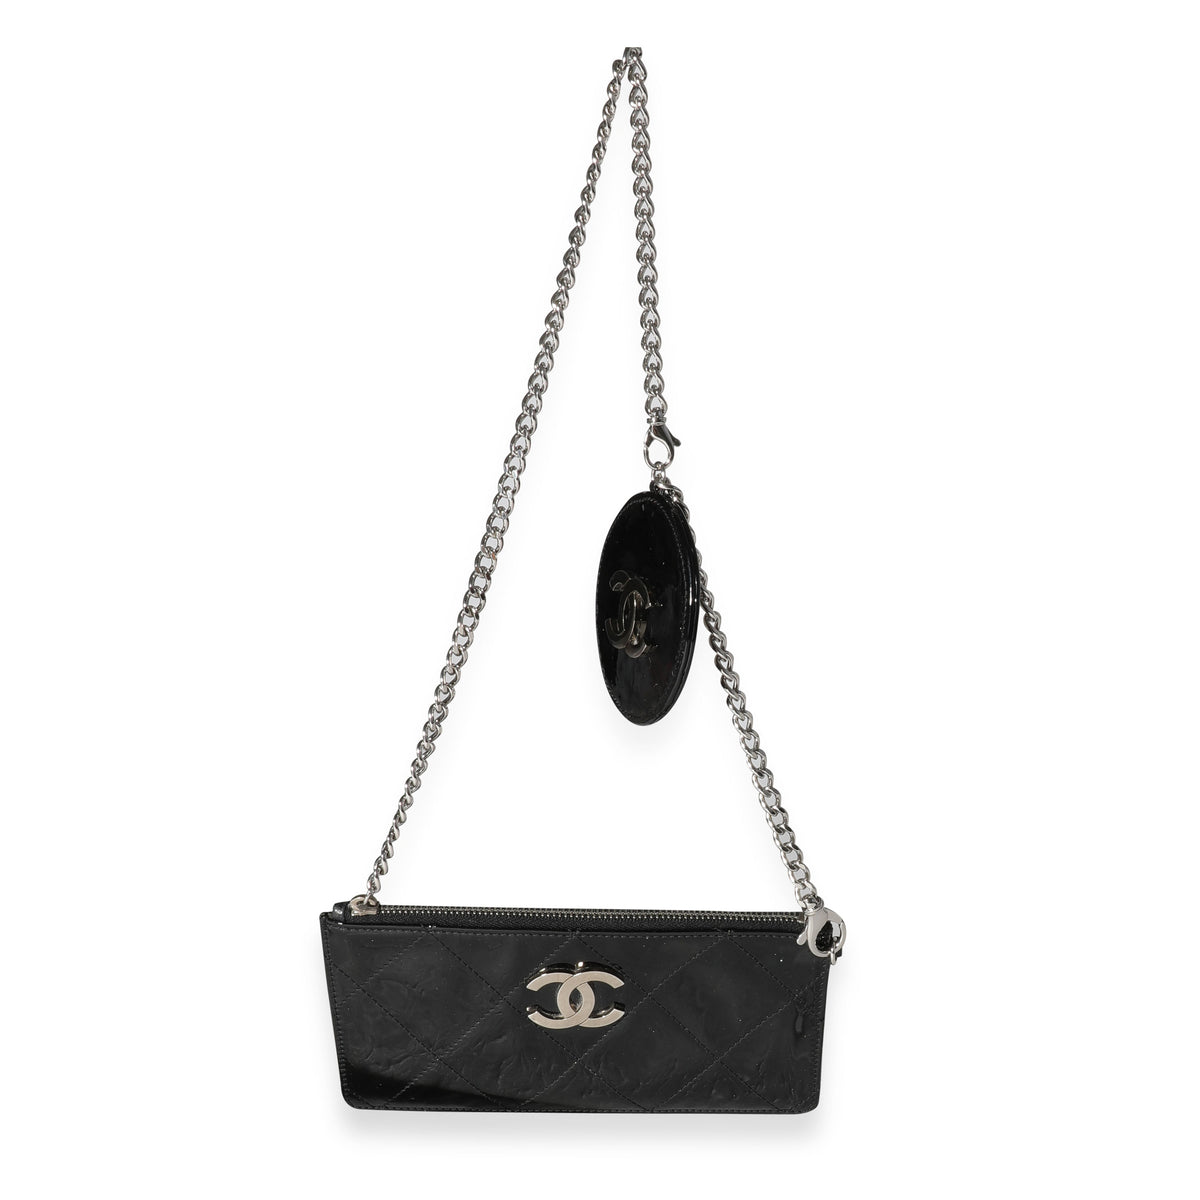 Chanel Black Quilted Patent Leather Chain Pochette, myGemma